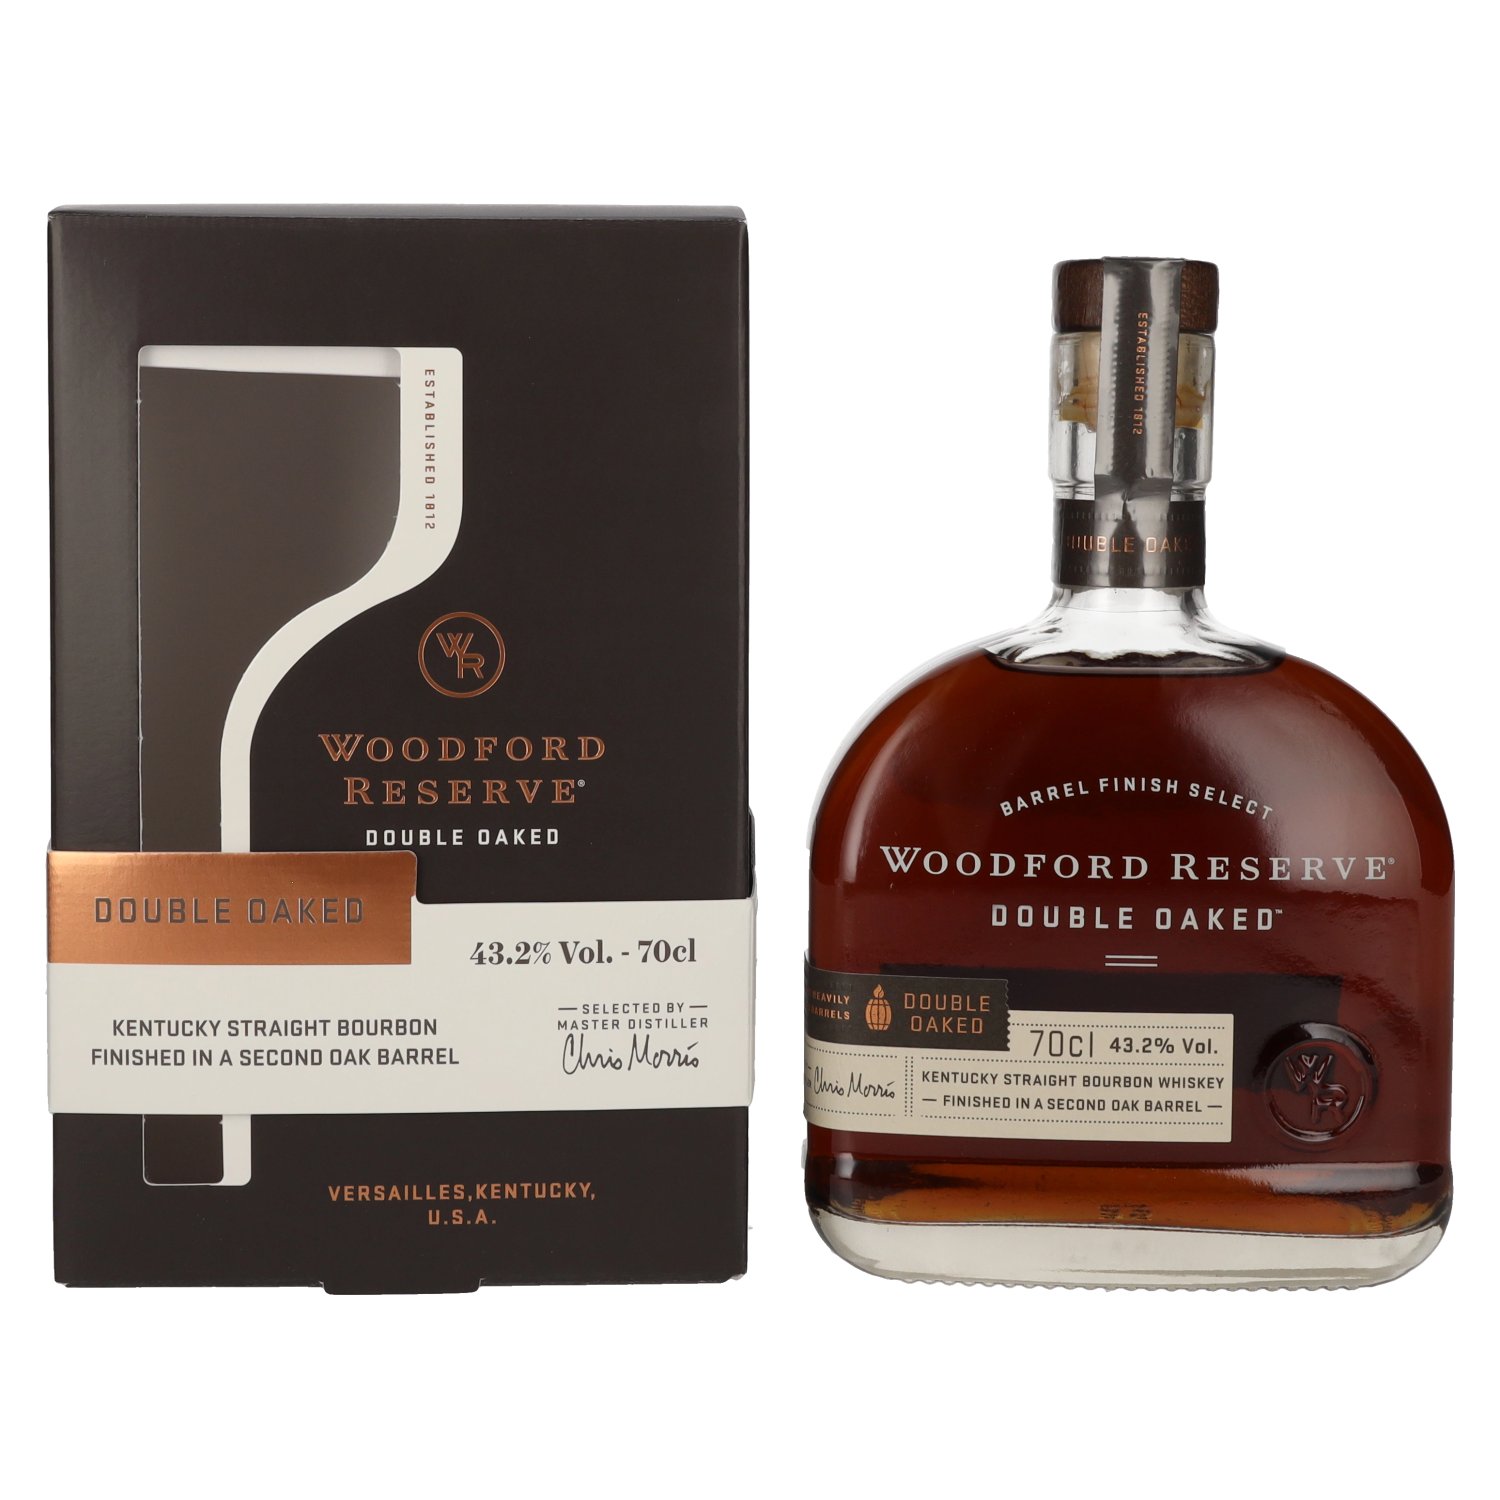 Woodford Reserve DOUBLE OAKED Kentucky Straight Bourbon Whiskey 43,2% Vol.  0,7l in Geschenkbox